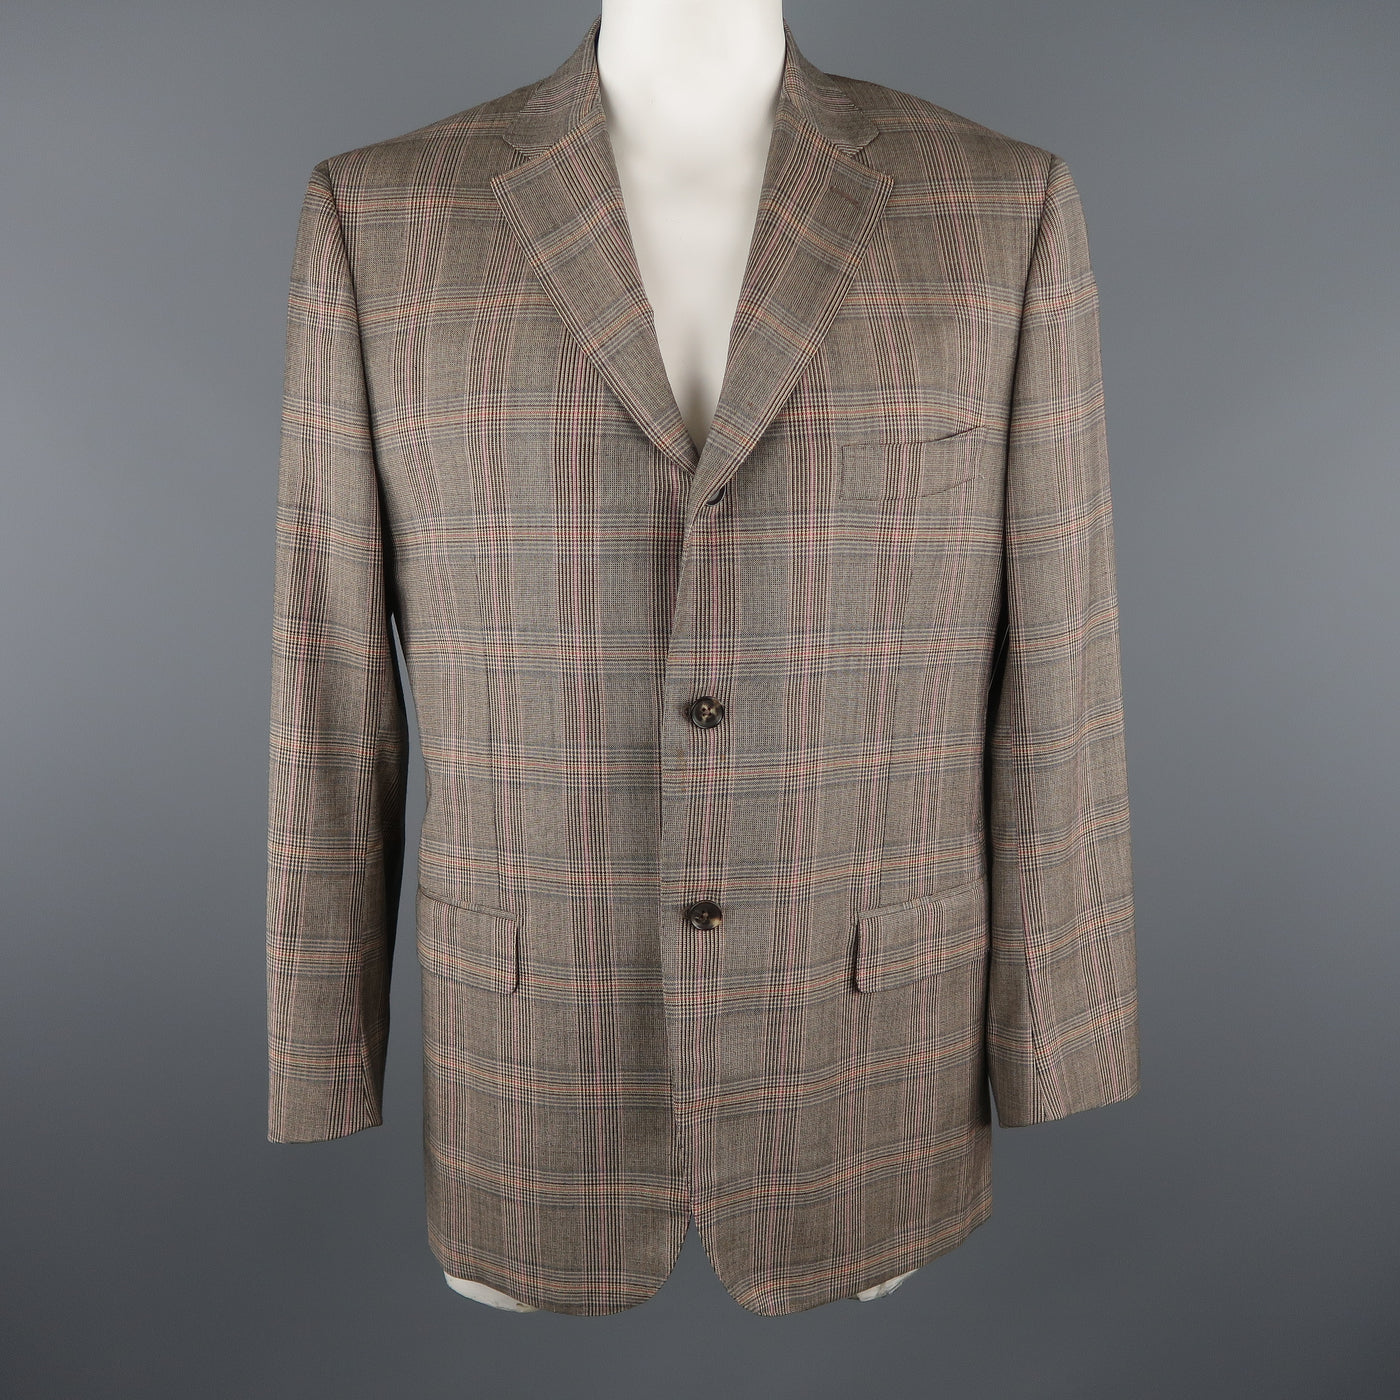 ISAIA Chest Size 46 Long Brown Plaid Wool Notch Lapel Sport Coat